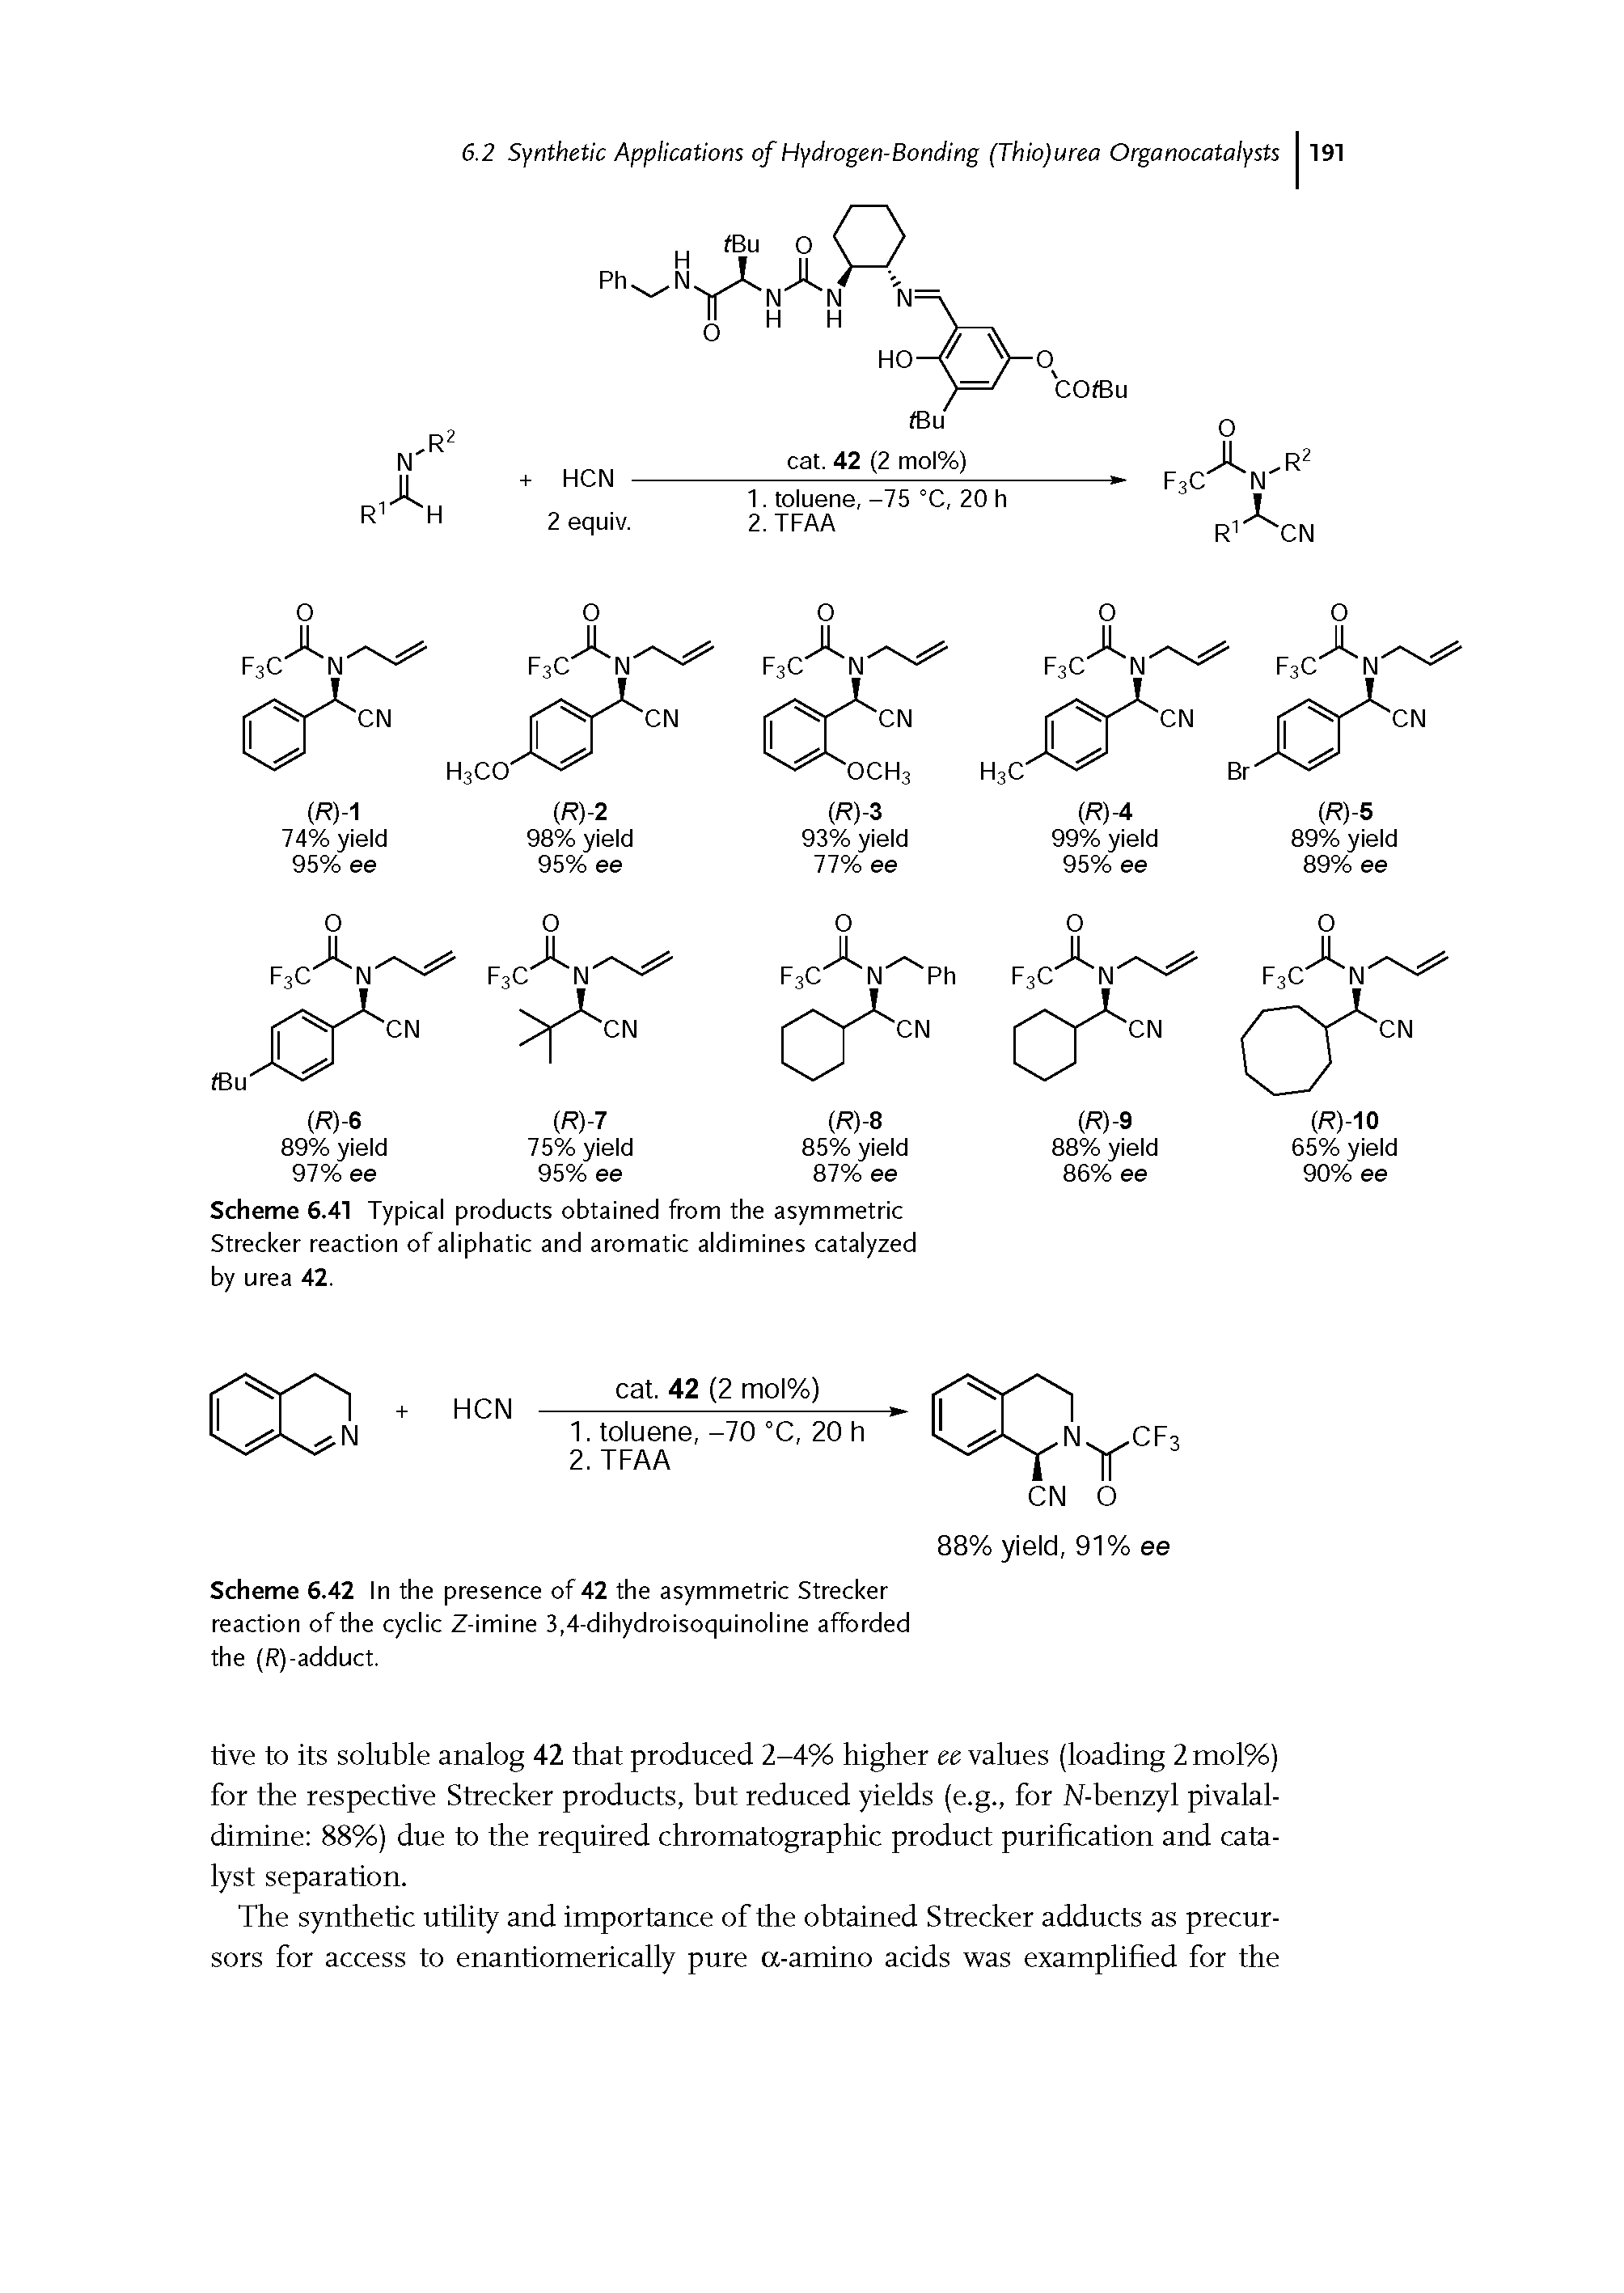 Scheme 6.41 Typical products obtained from the asymmetric Strecker reaction of aliphatic and aromatic aldimines catalyzed by urea 42.